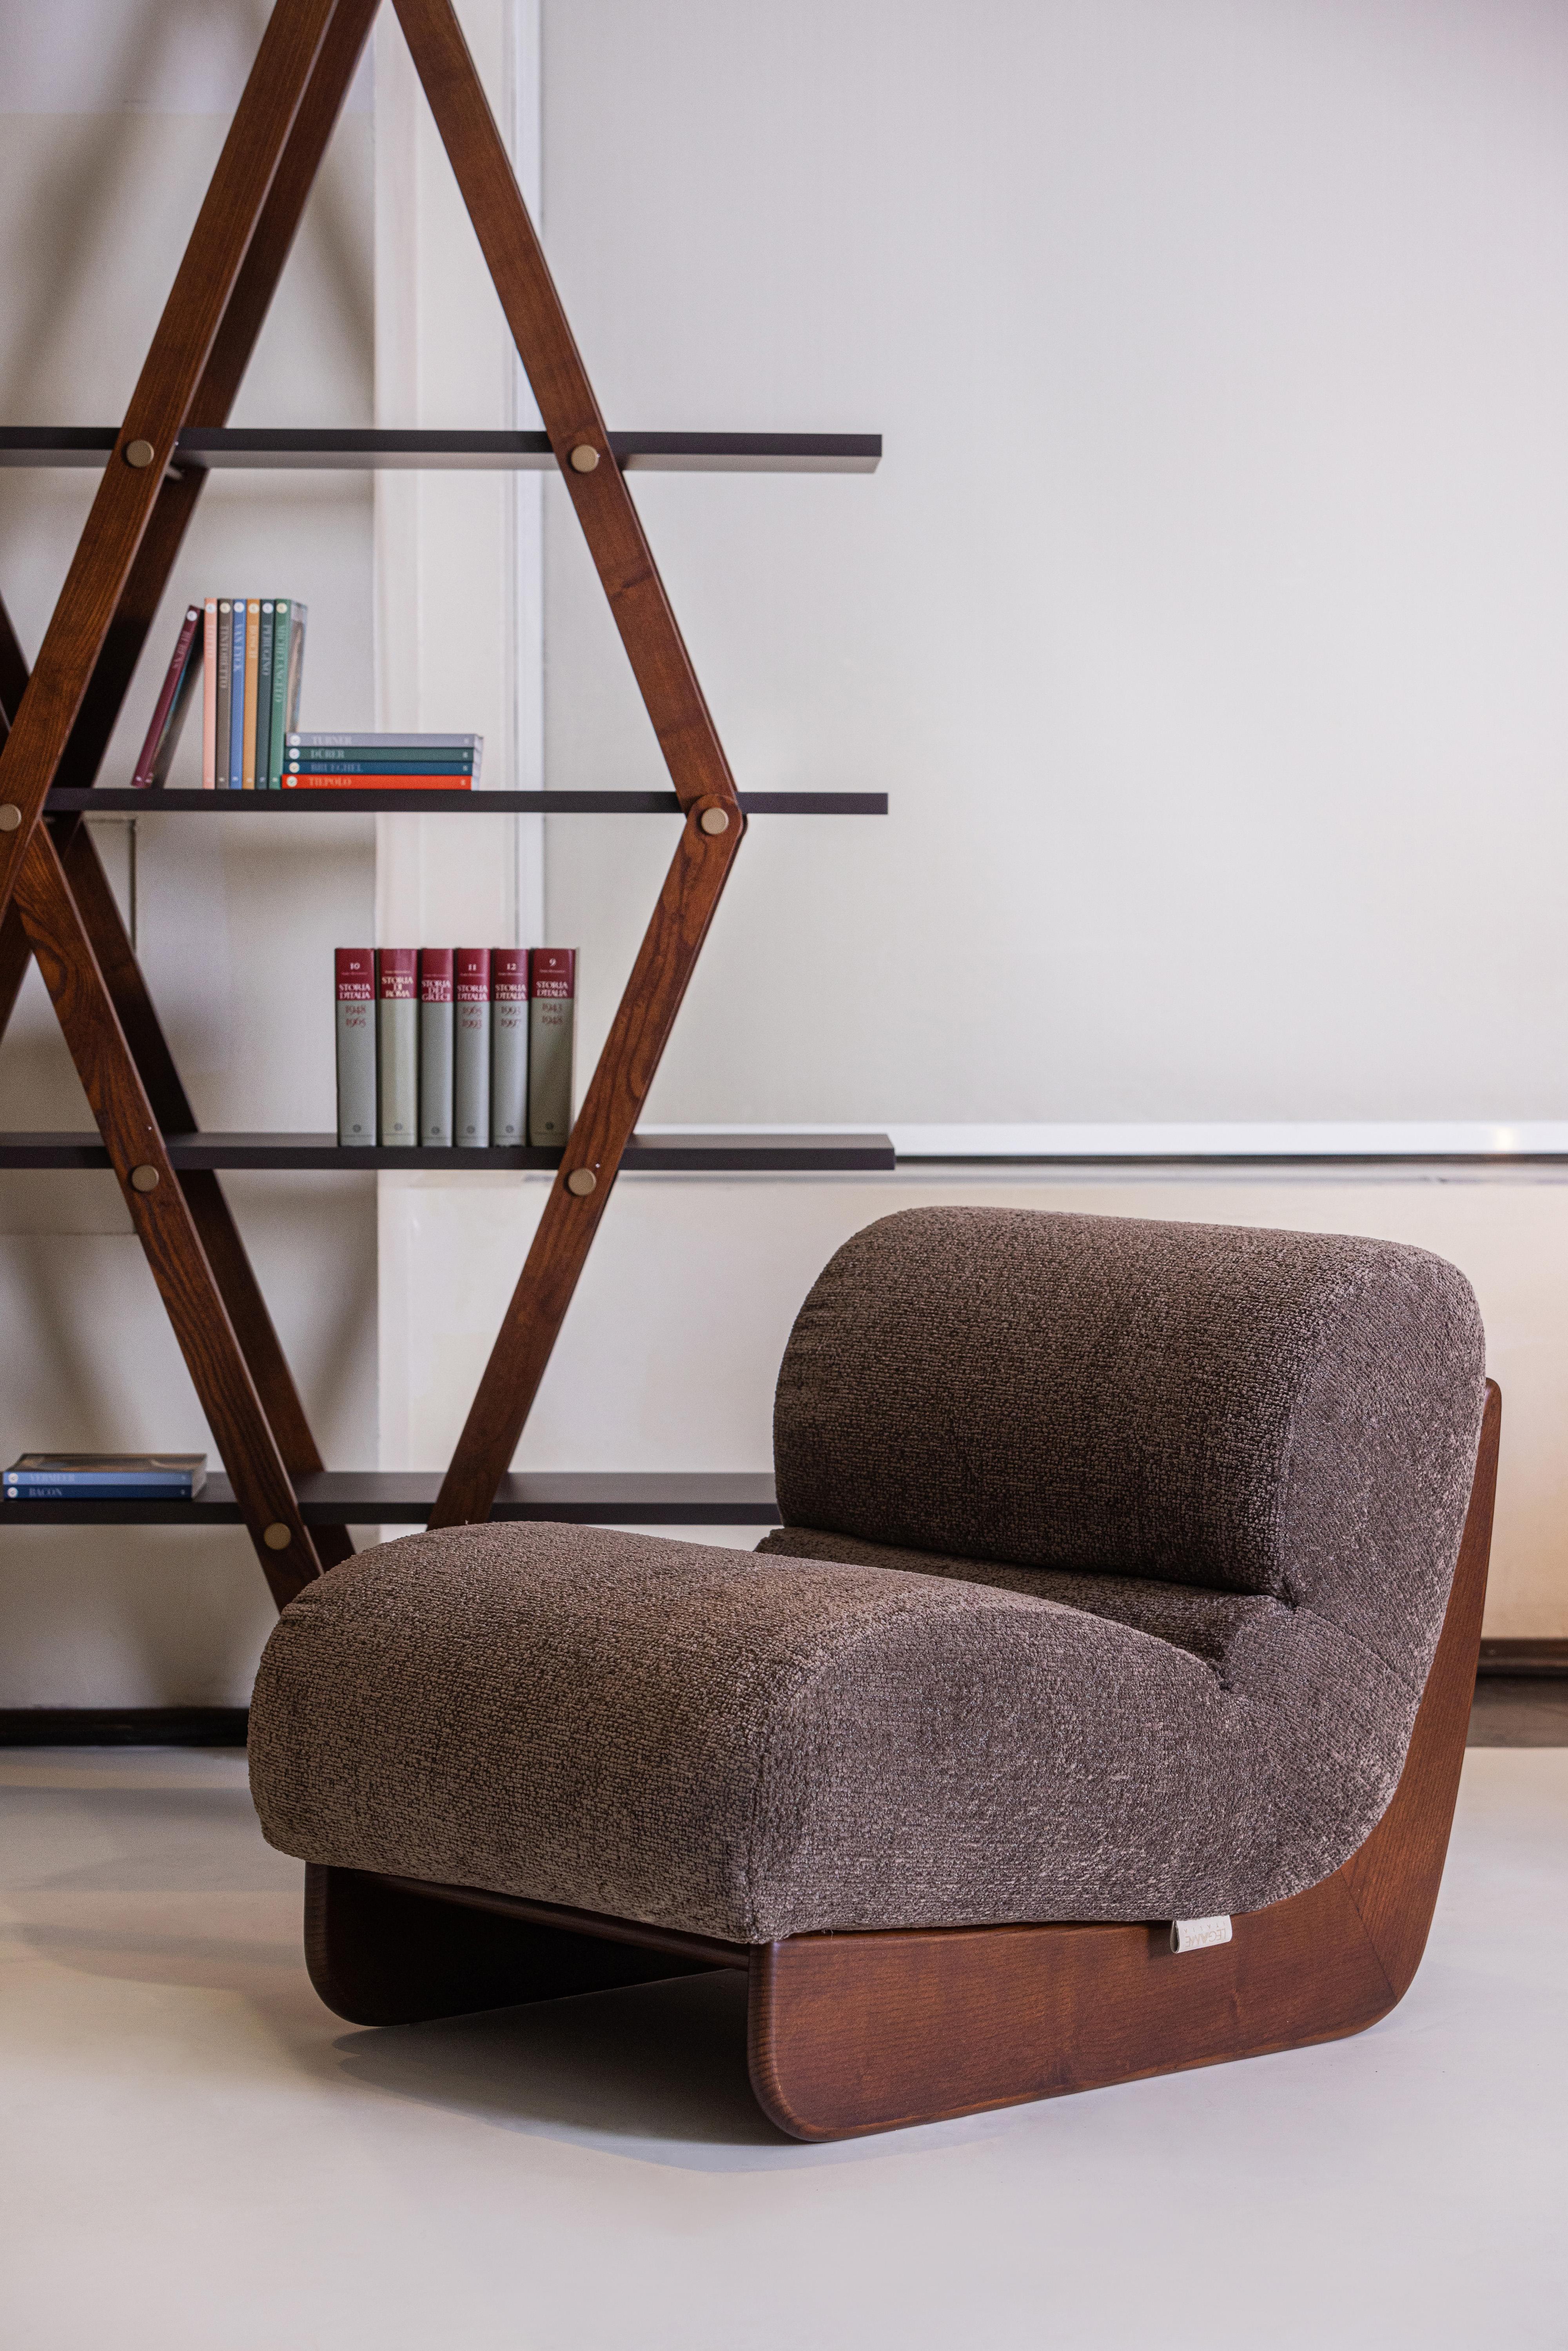 Designed by Brazilian designer Ricardo Antonio, a student of Oscar Niemeyer, the Ovunque armchair features a contemporary design with a solid ash wood frame with clean lines that frames a soft, comfortable seat cushion. The padding, supported by